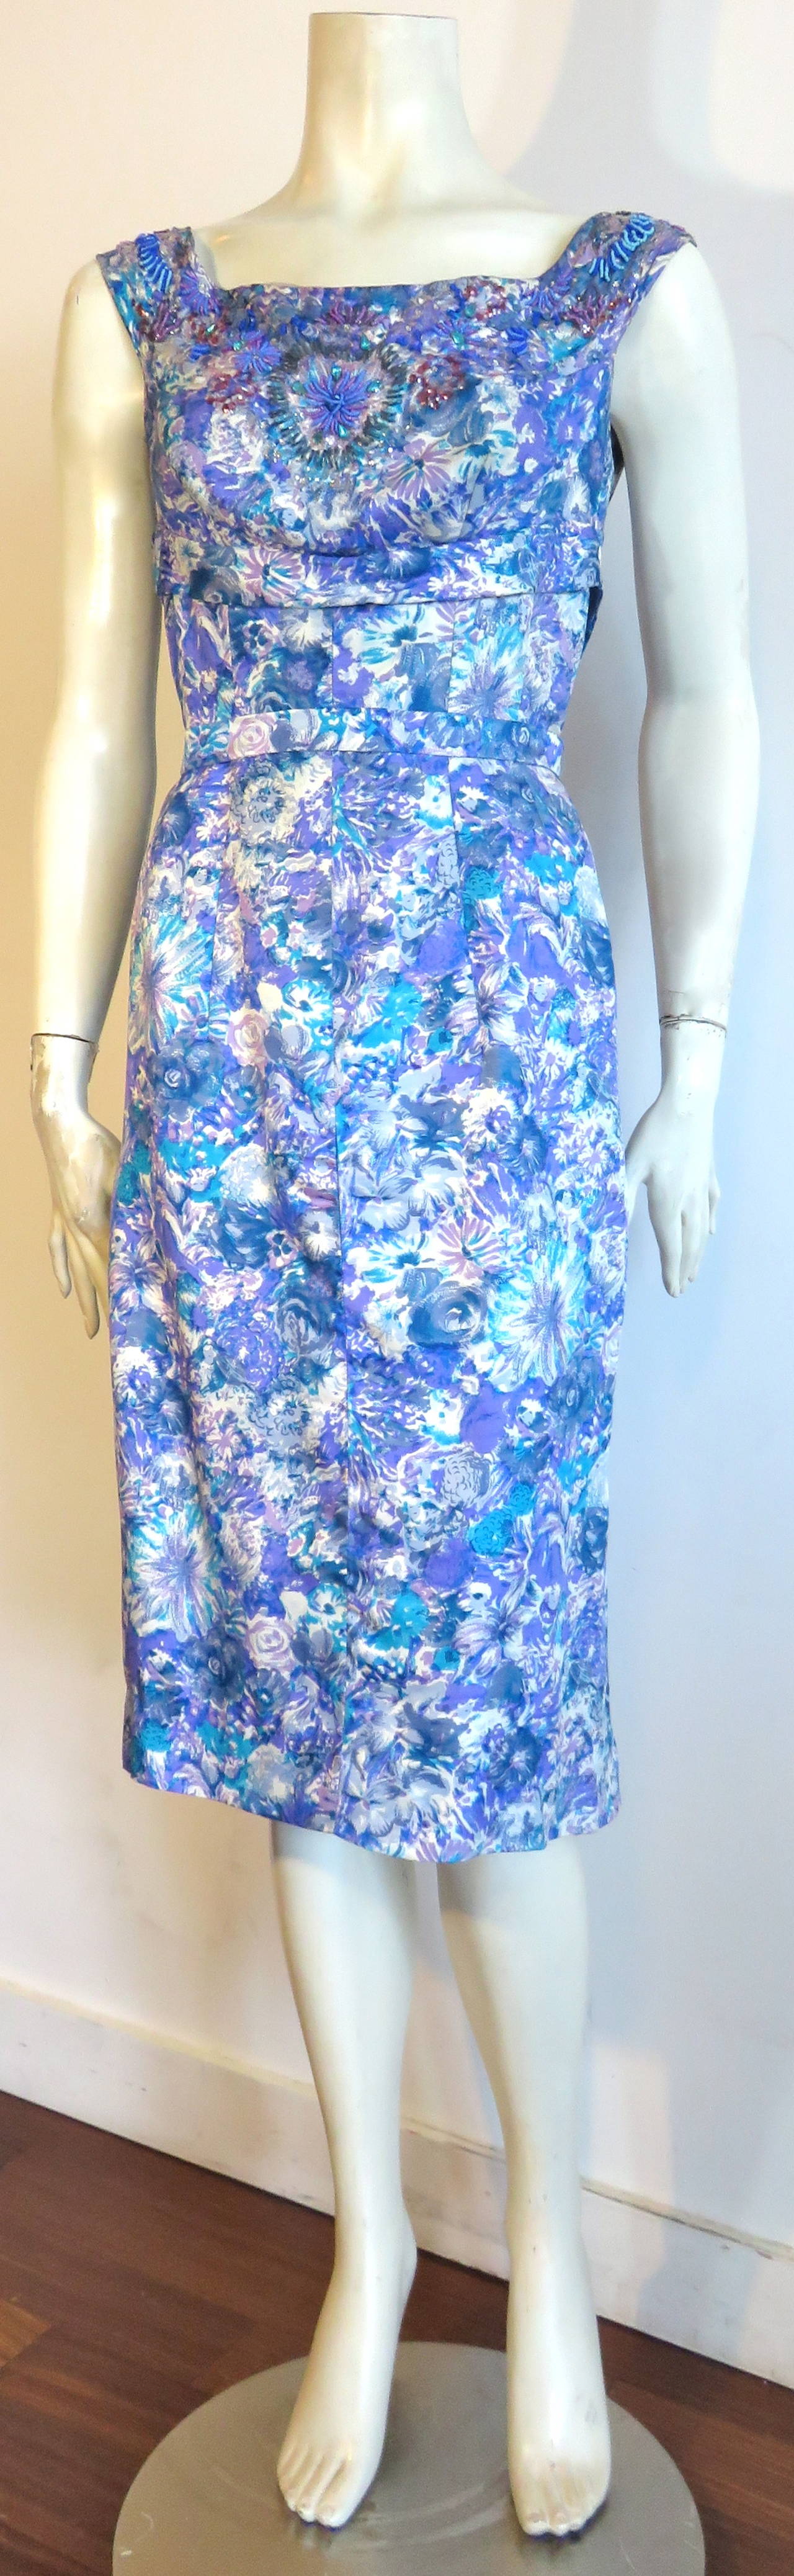 Beautiful, 1950's ADELE SIMPSON, beaded floral silk cocktail dress.

Impressionistic, painted floral artwork in tones of white, lavender, periwinkle, and turquoise printed onto super-soft, lightweight silk twill fabrication.

Gorgeous